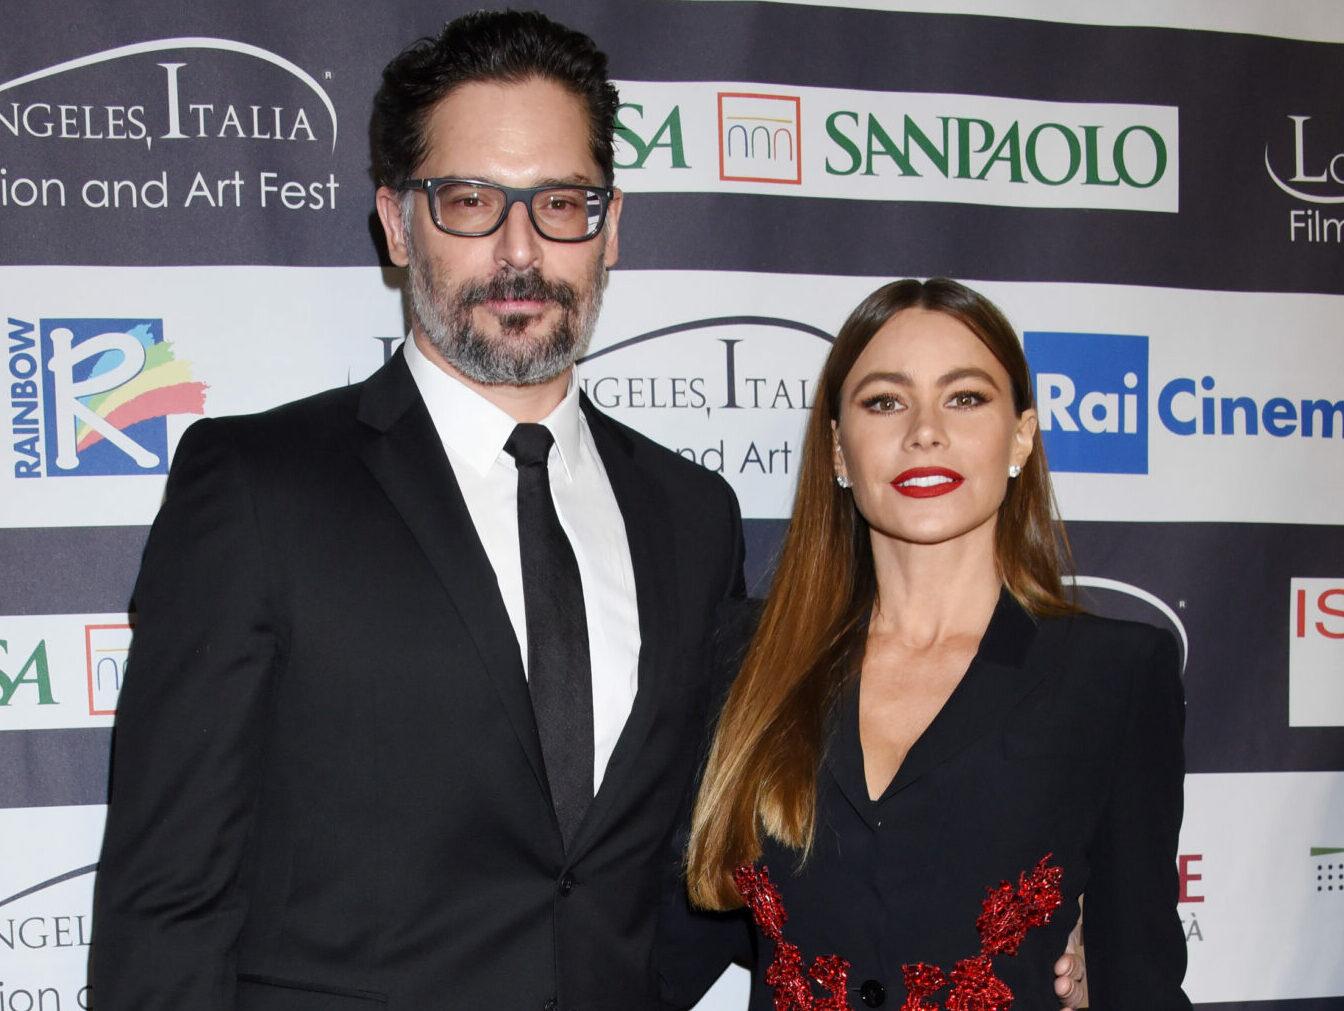 13th Annual L.A. Italia Fest Hollywood held at TCL Chinese 6 Theatres on February 25, 2018 in Hollywood, CA. 25 Feb 2018 Pictured: Joe Manganiello and Sofia Vergara.